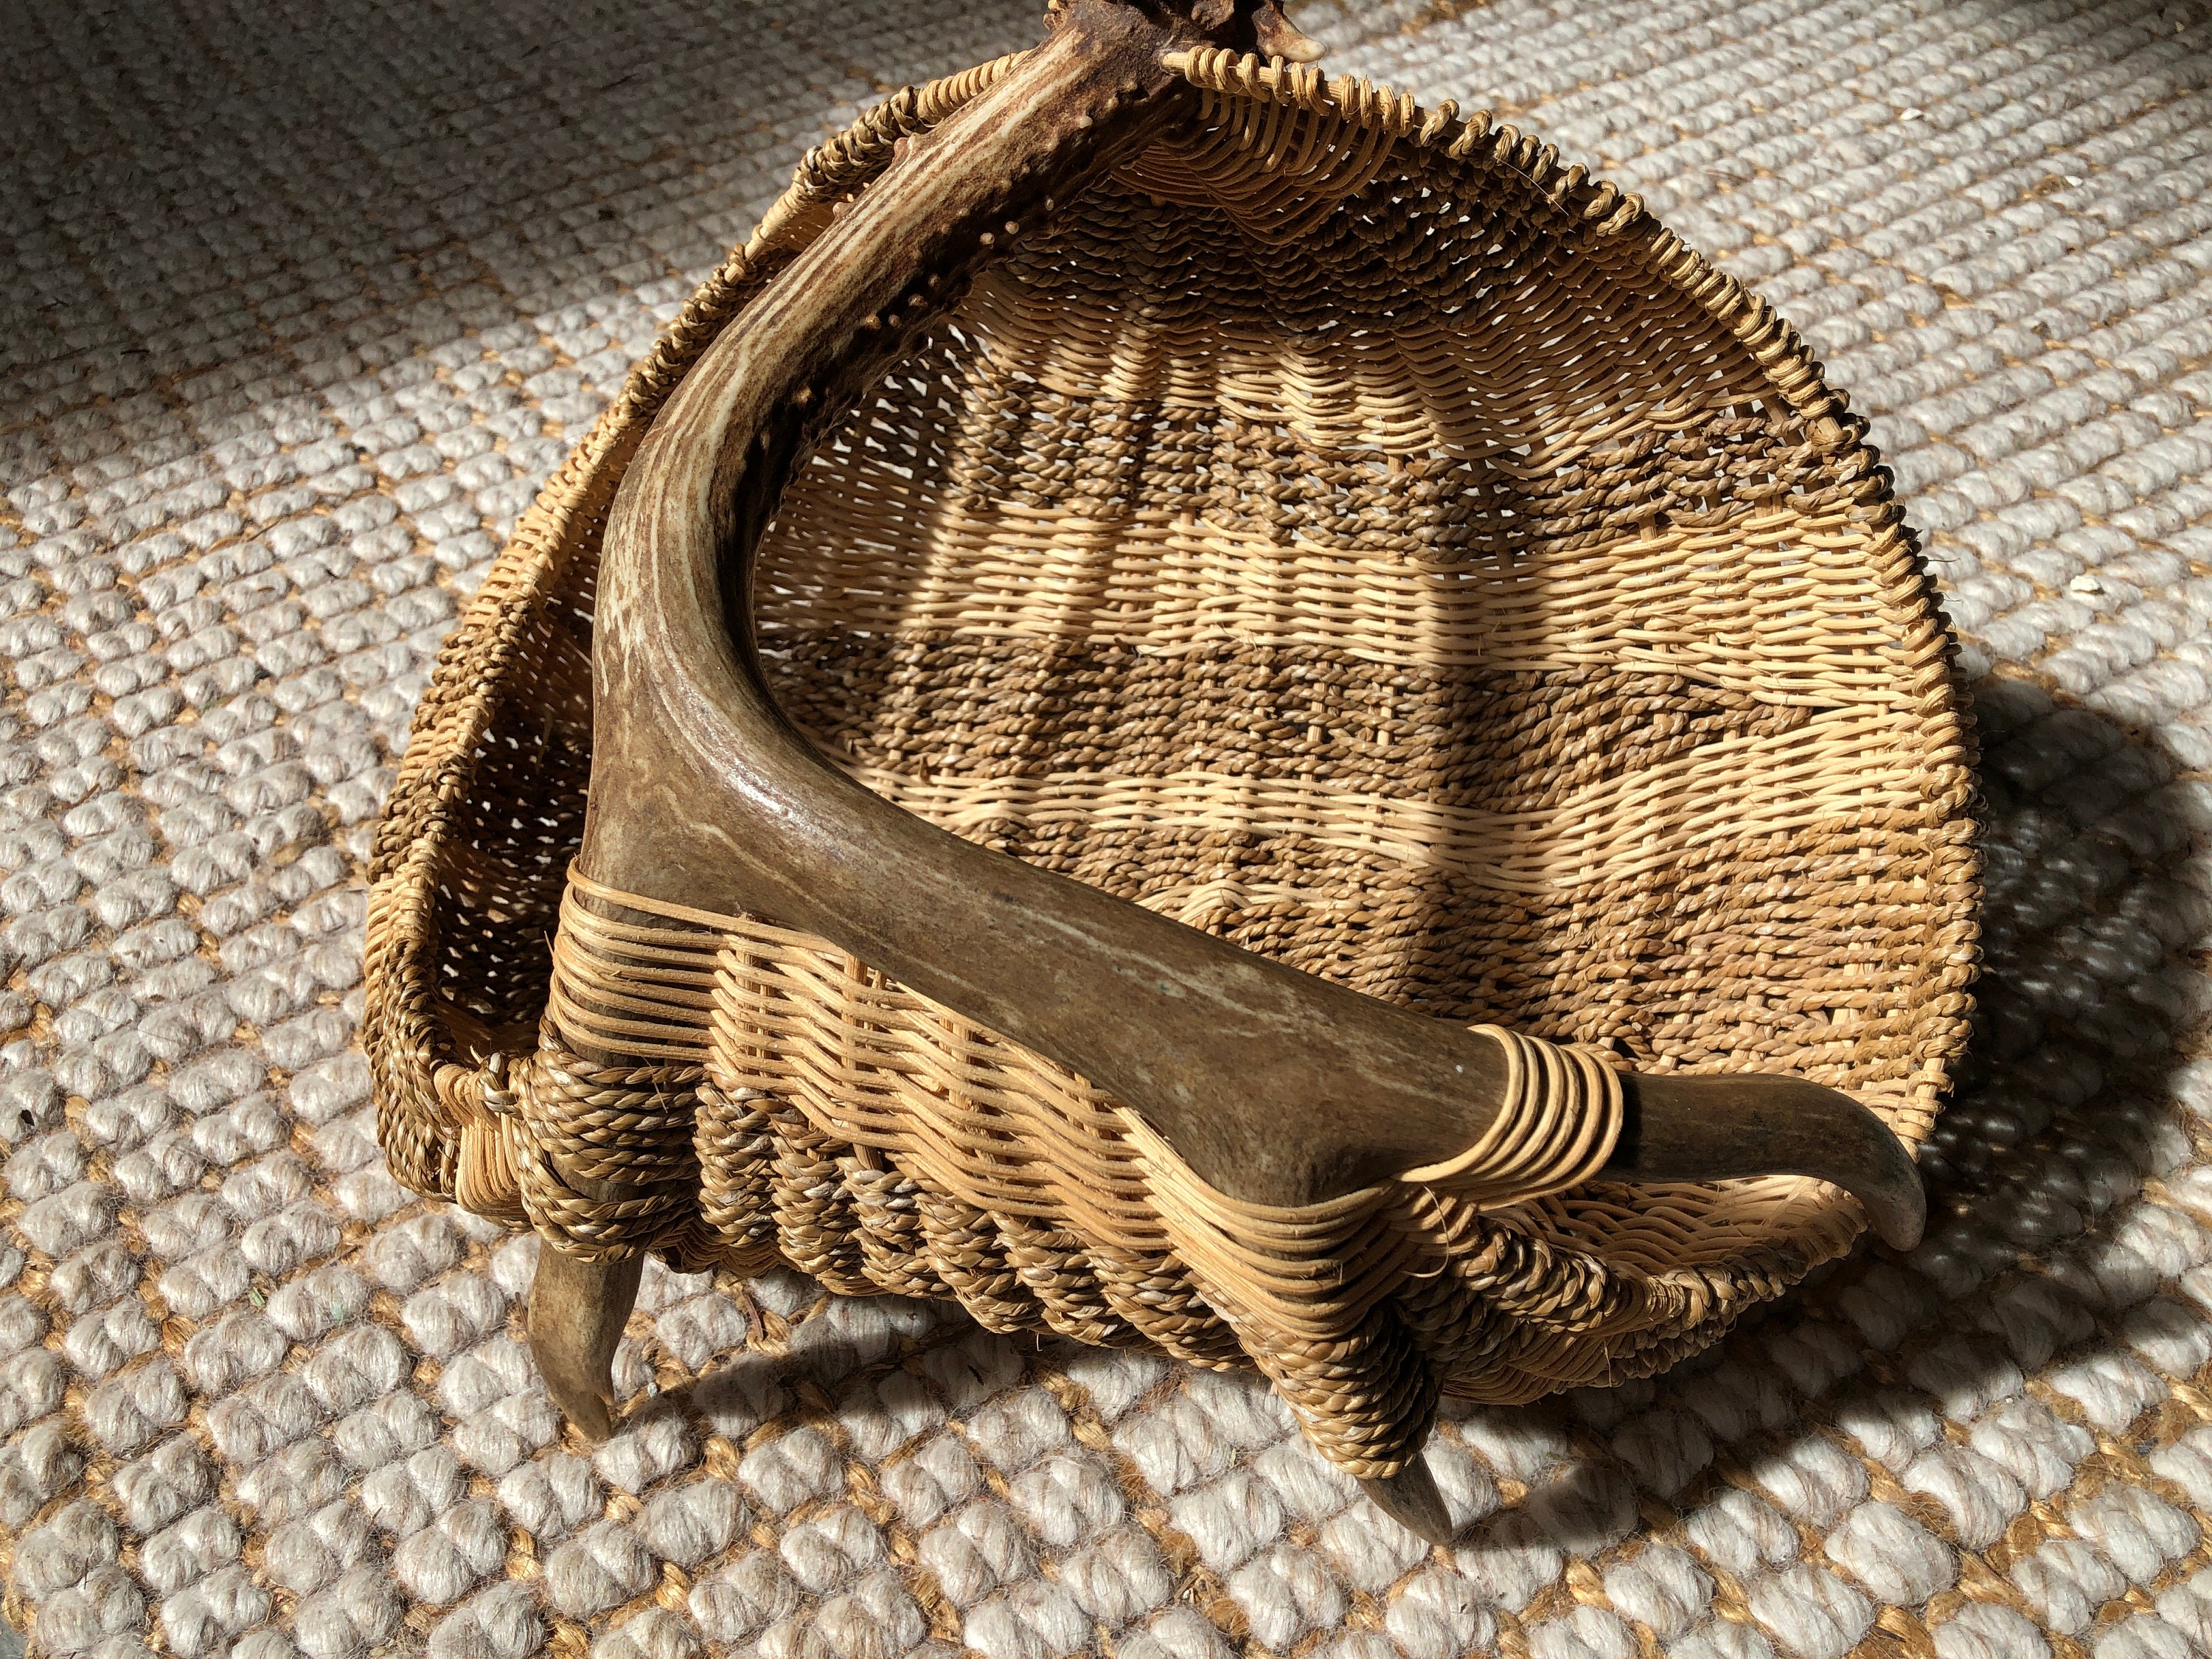 Wicker Fishing Creel Basket With Weathered Leather Trim, Woven Fly Fishing  Collectible, Rustic Lakehouse Cabin Decor, Scott's Trout Flies 